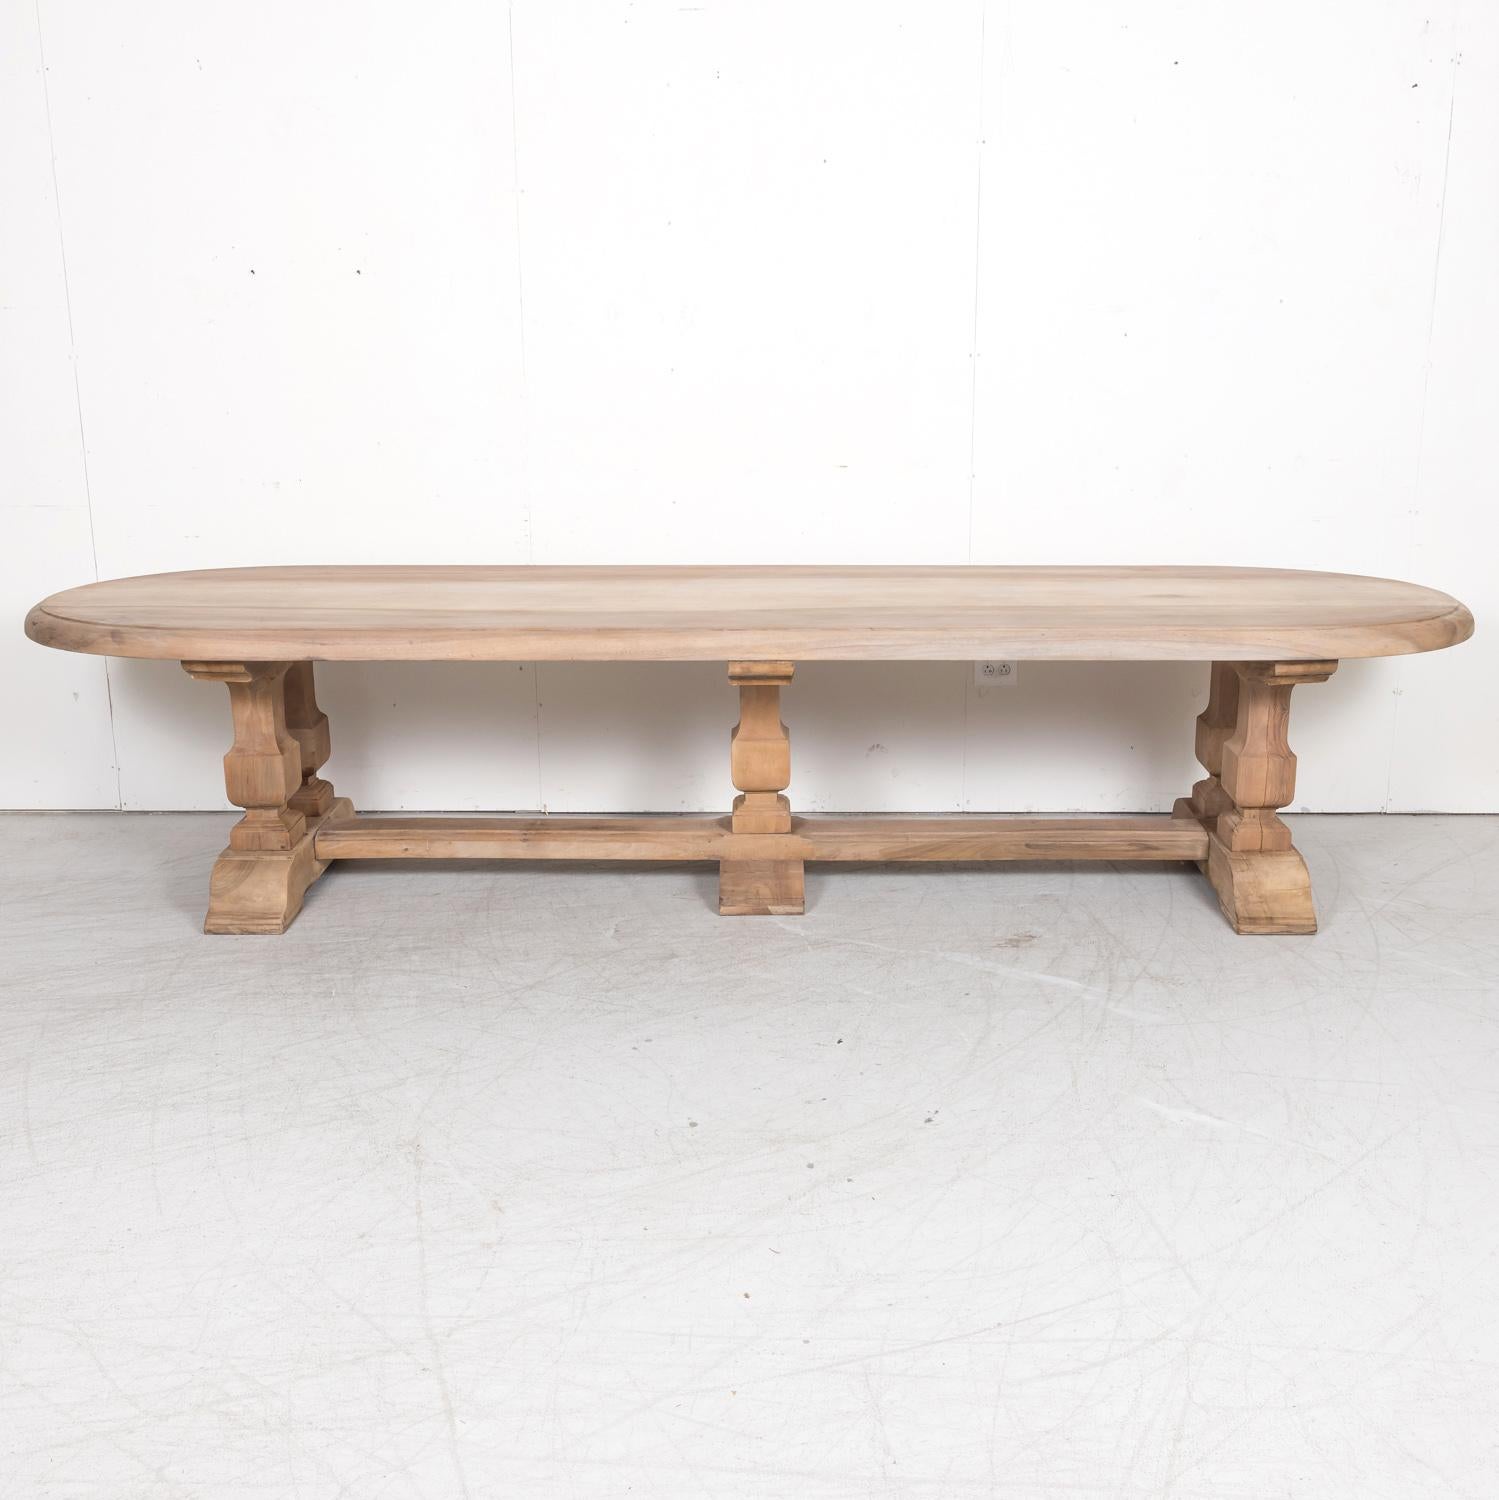 A large antique French trestle dining table, handcrafted of solid walnut by skilled artisans near Saint-Rémy-de-Provence in the South of France, circa 1920s. Having a bleached or washed finish, this impressive Provençal trestle table has a 2.75